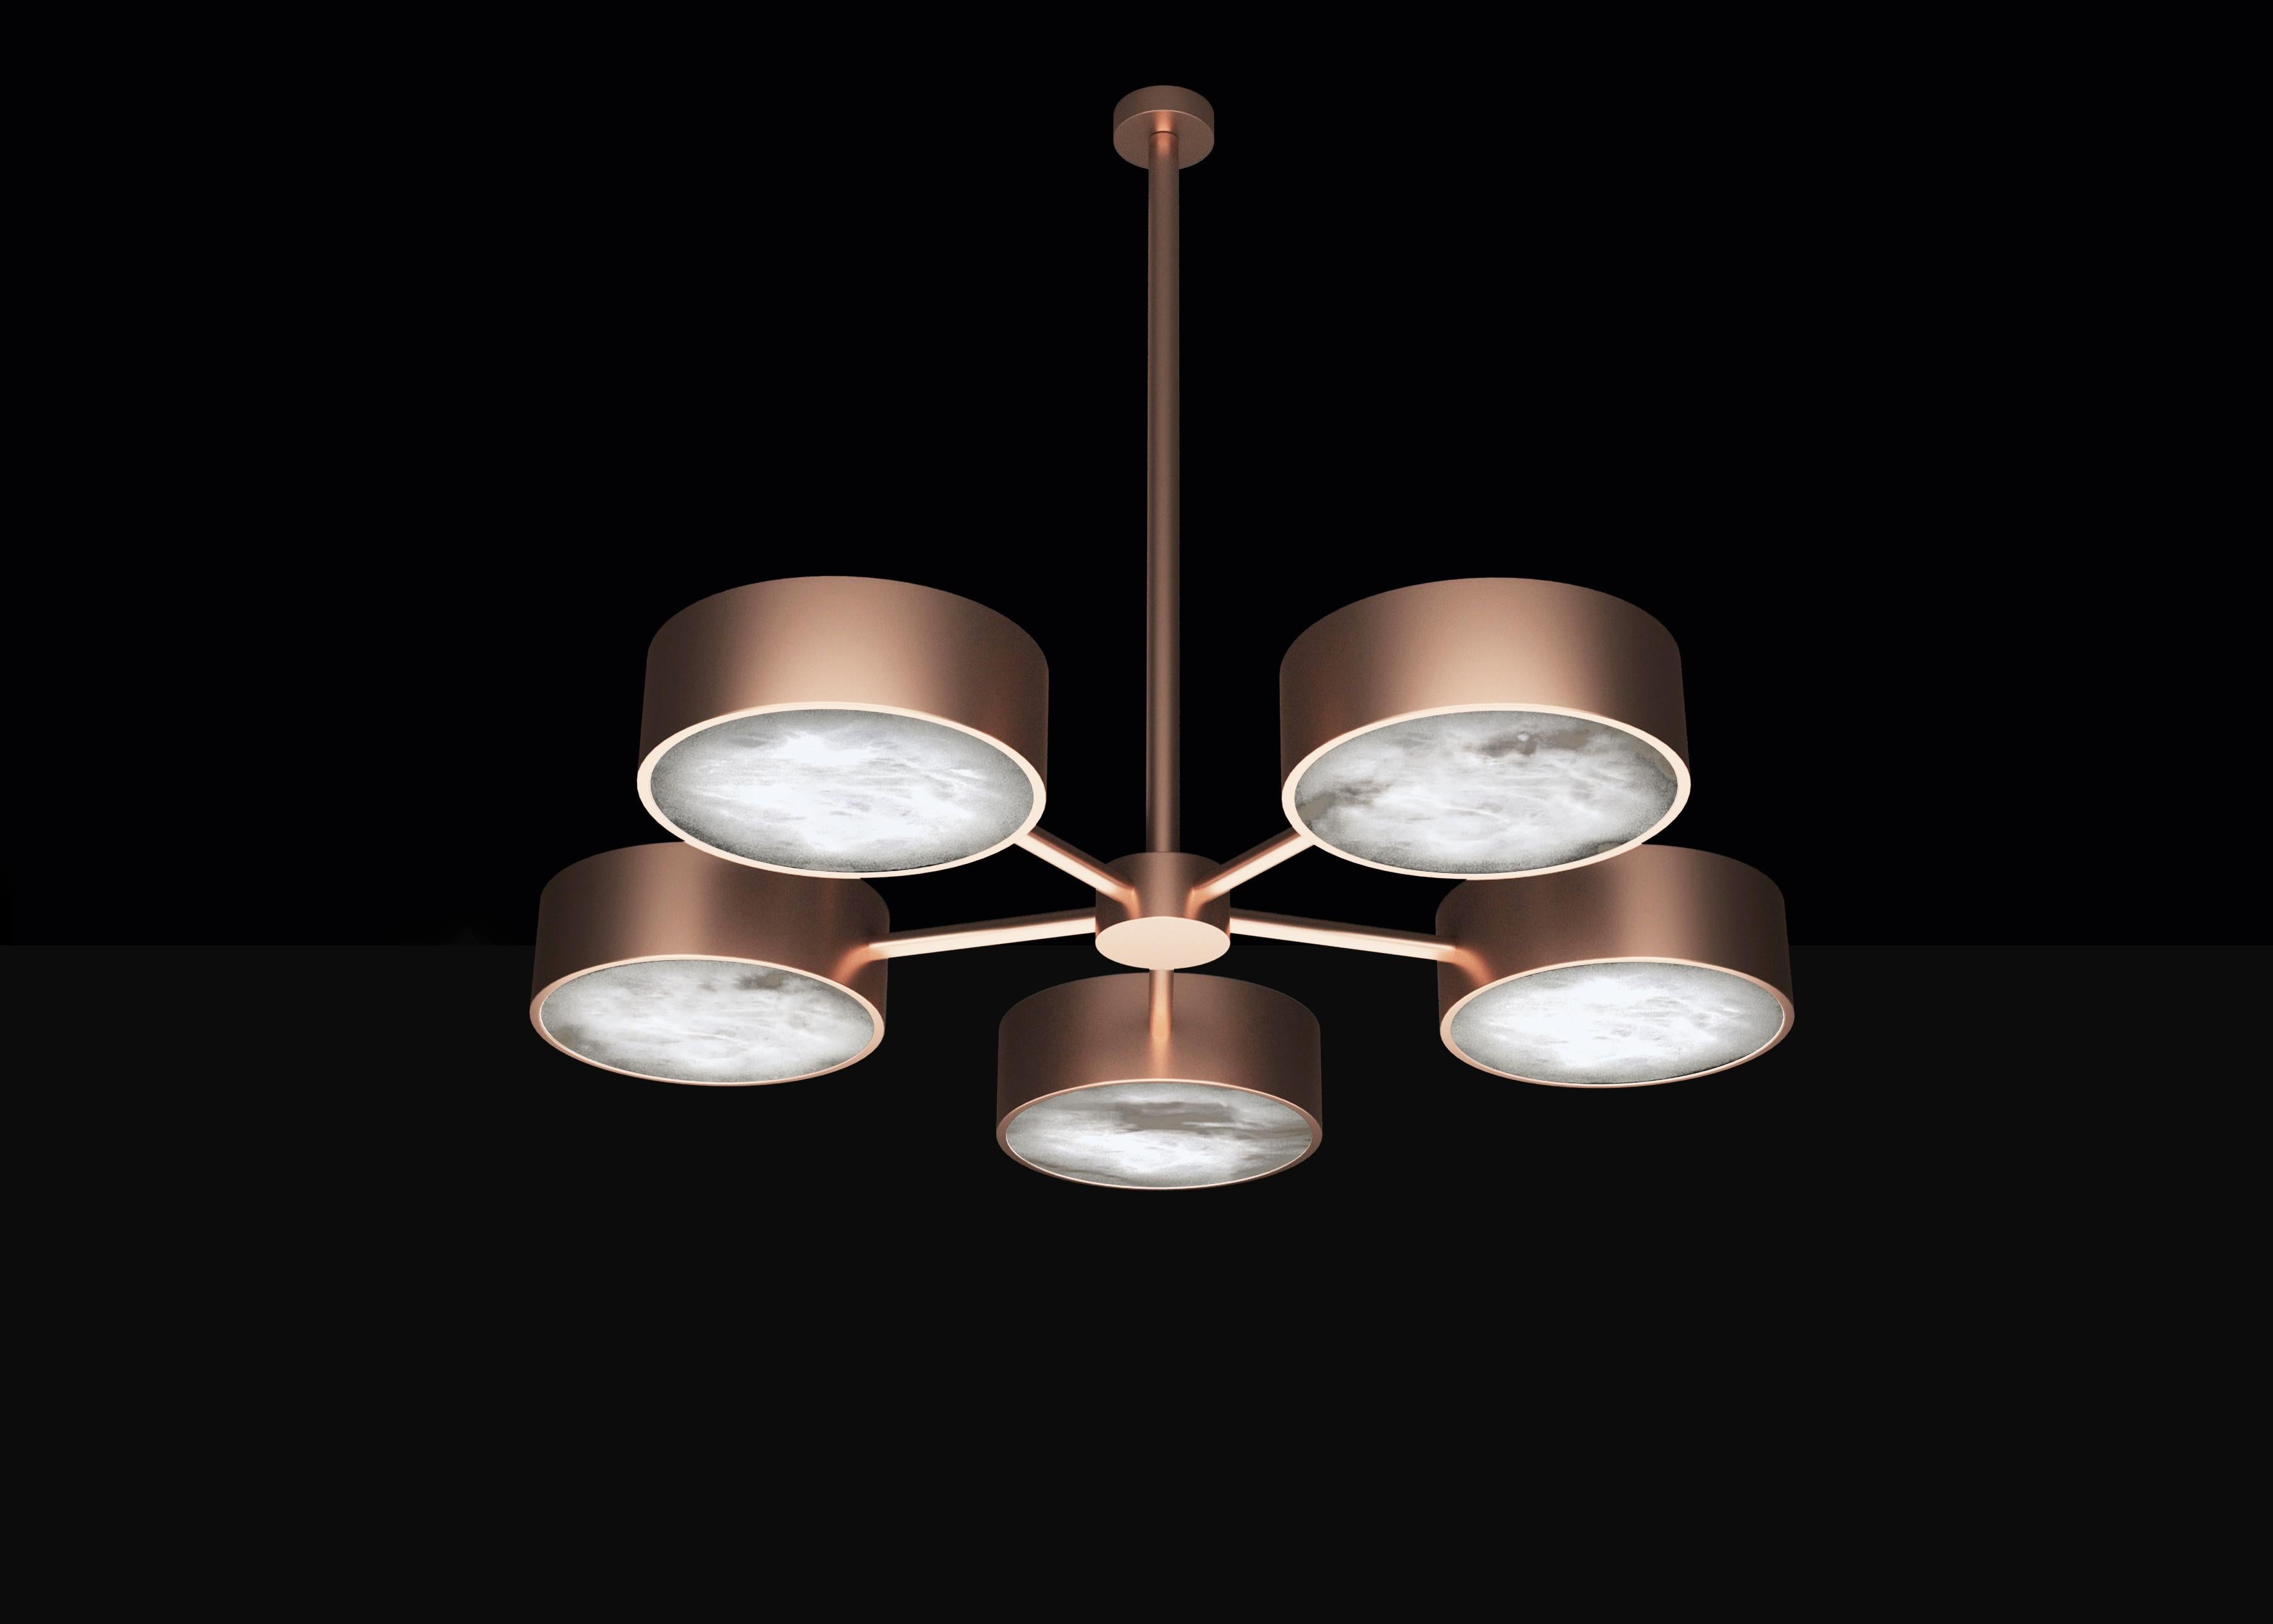 Chaos Copper Chandelier by Alabastro Italiano
Dimensions: D 97 x W 100 x H 84.5 cm.
Materials: White alabaster and copper.

Available in different finishes: Shiny Silver, Bronze, Brushed Brass, Ruggine of Florence, Brushed Burnished, Shiny Gold,